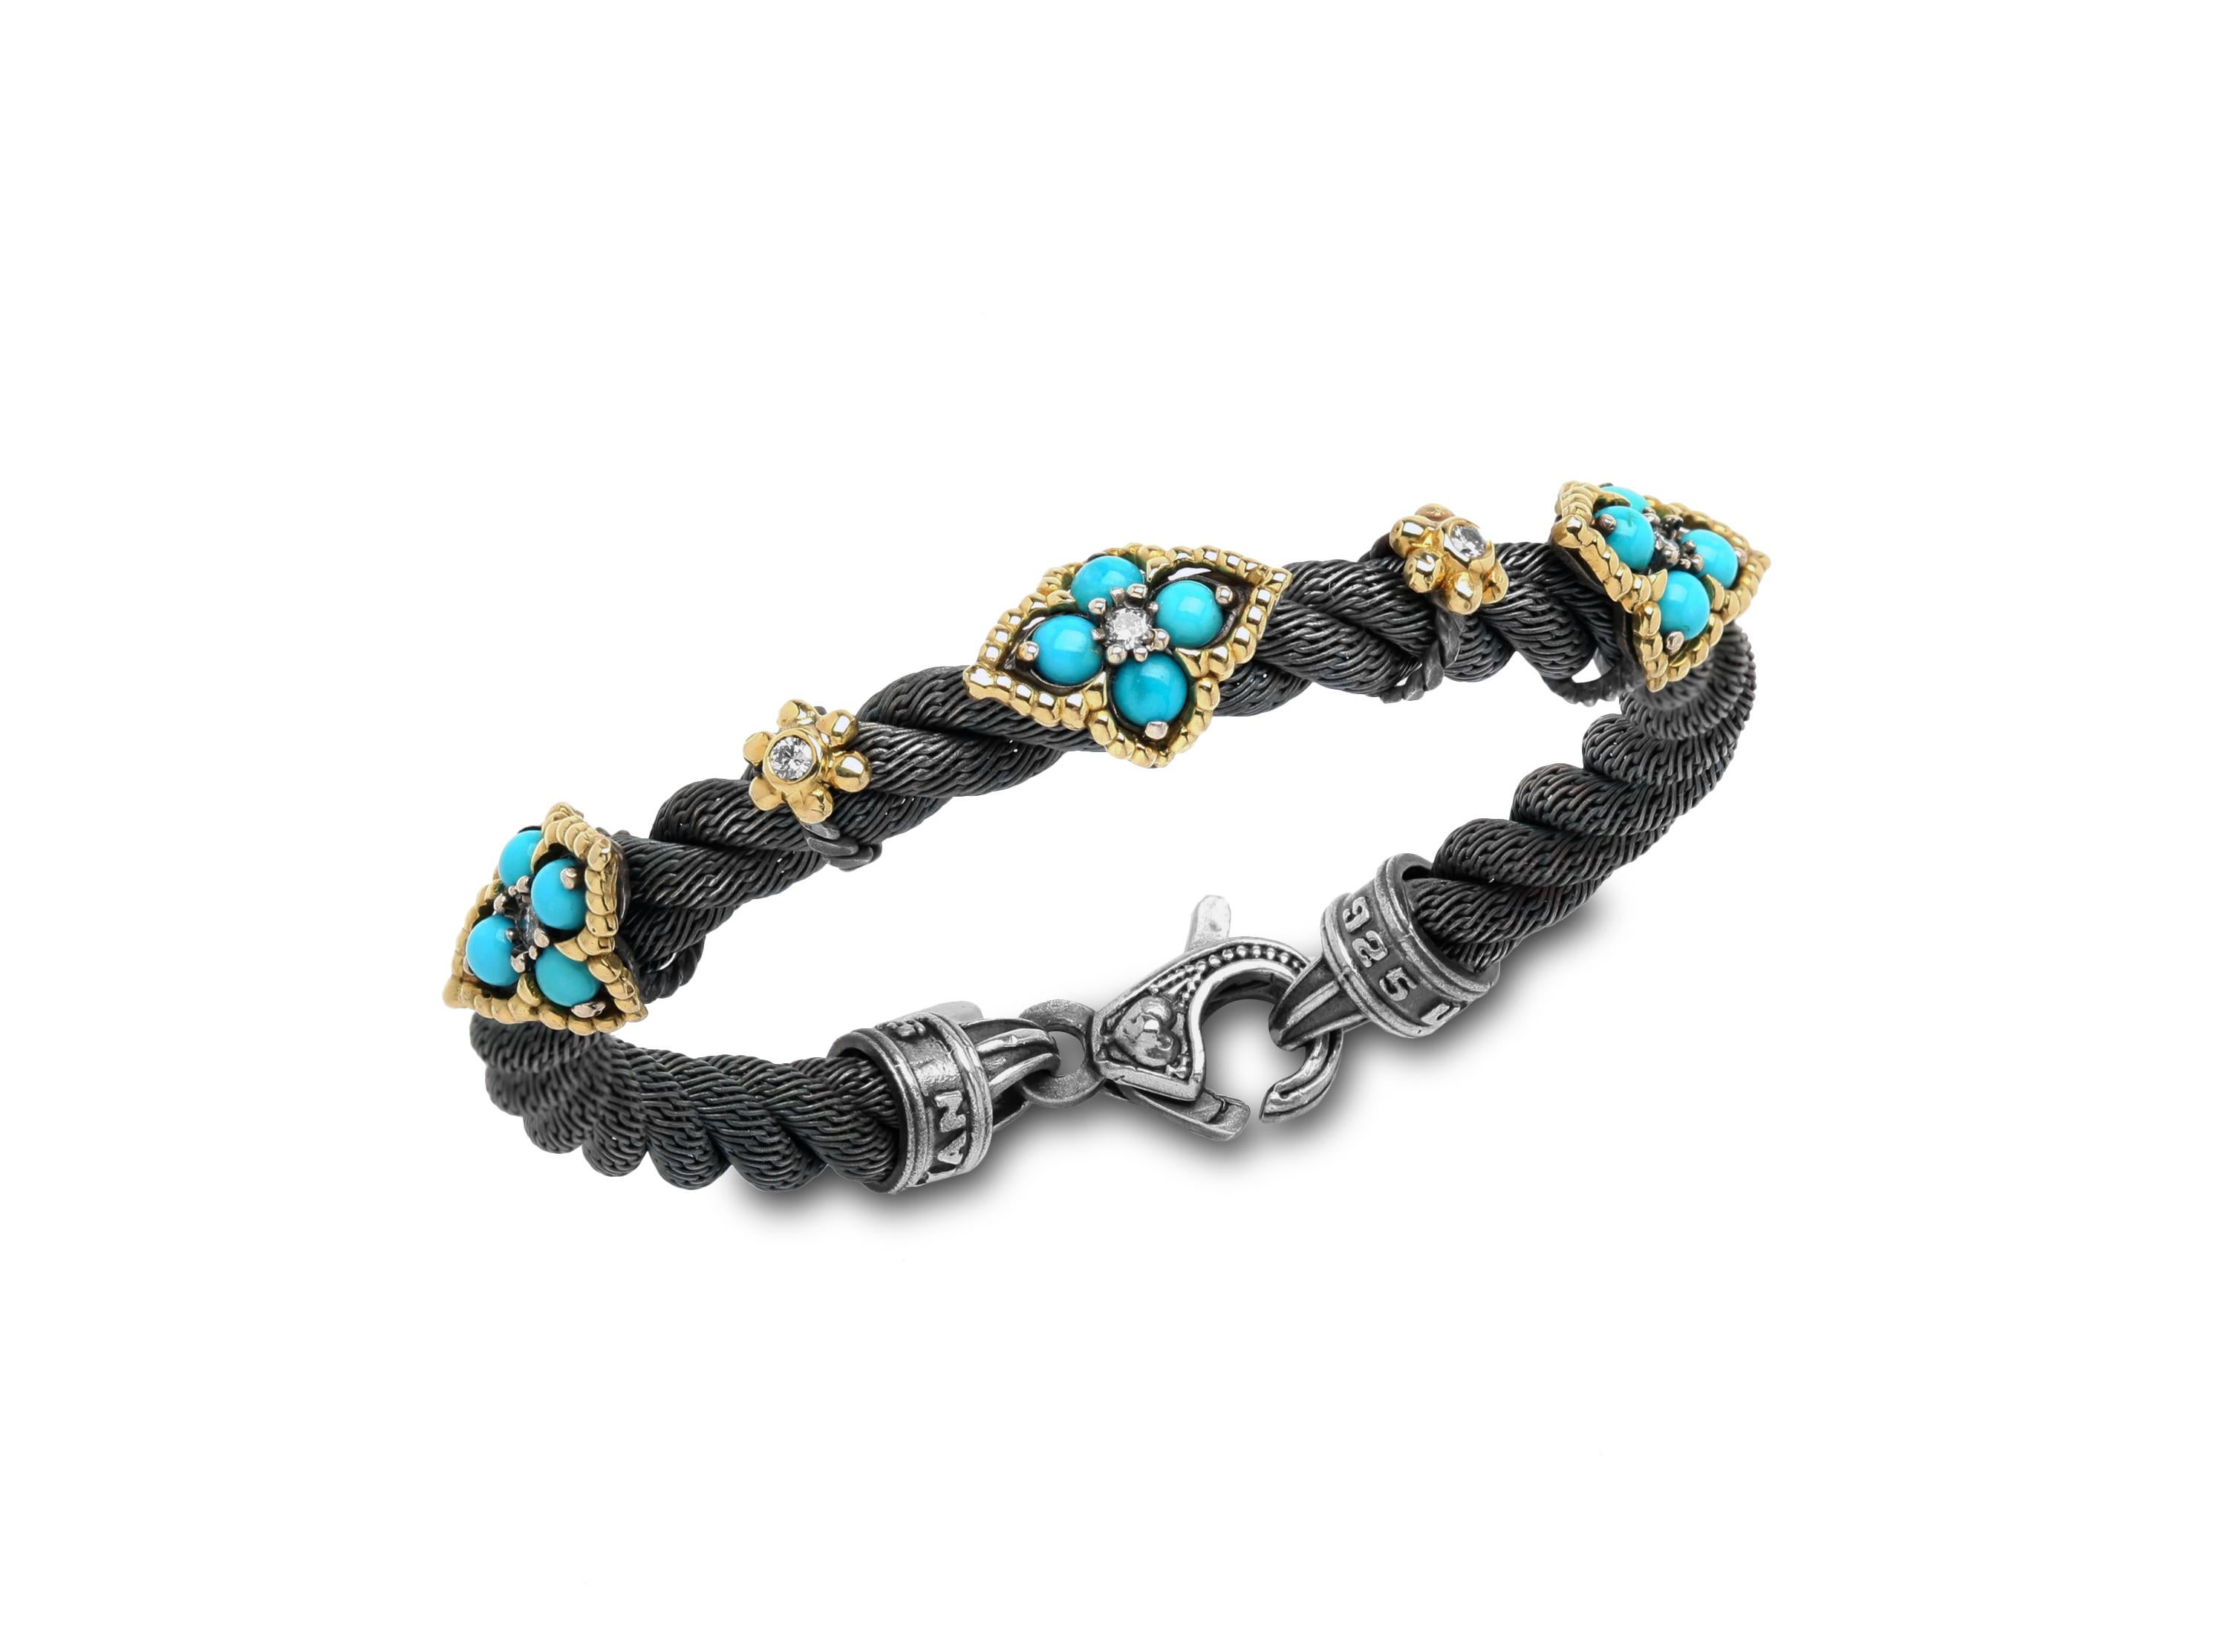 Aged Silver and 18K Gold Chain Bracelet with Diamonds and Sleeping Beauty Turquoise by Stambolian

This unique bracelet features three sections of Turquoise with four stones in each with a diamond in the center AND two sections of diamond bezels set